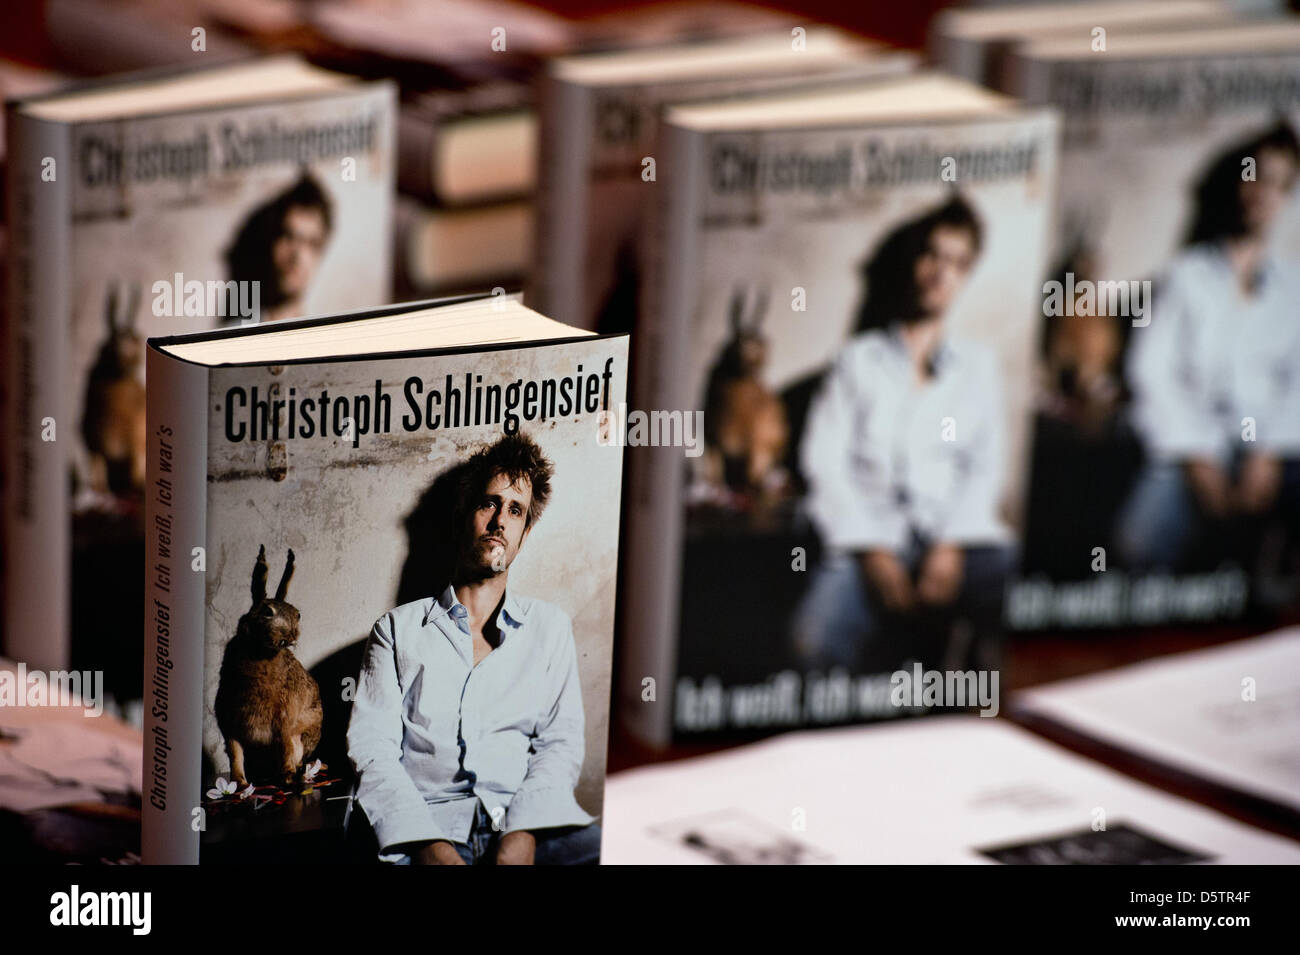 The book 'Ich weiss, ich war's' ('I know, it was me') by Christoph Schlingensief is on display during a press conference at the Volksbuehne in Berlin, Germany, 24 September 2012. The book will be published on 08 October 2012. Photo: SOEREN STACHE Stock Photo